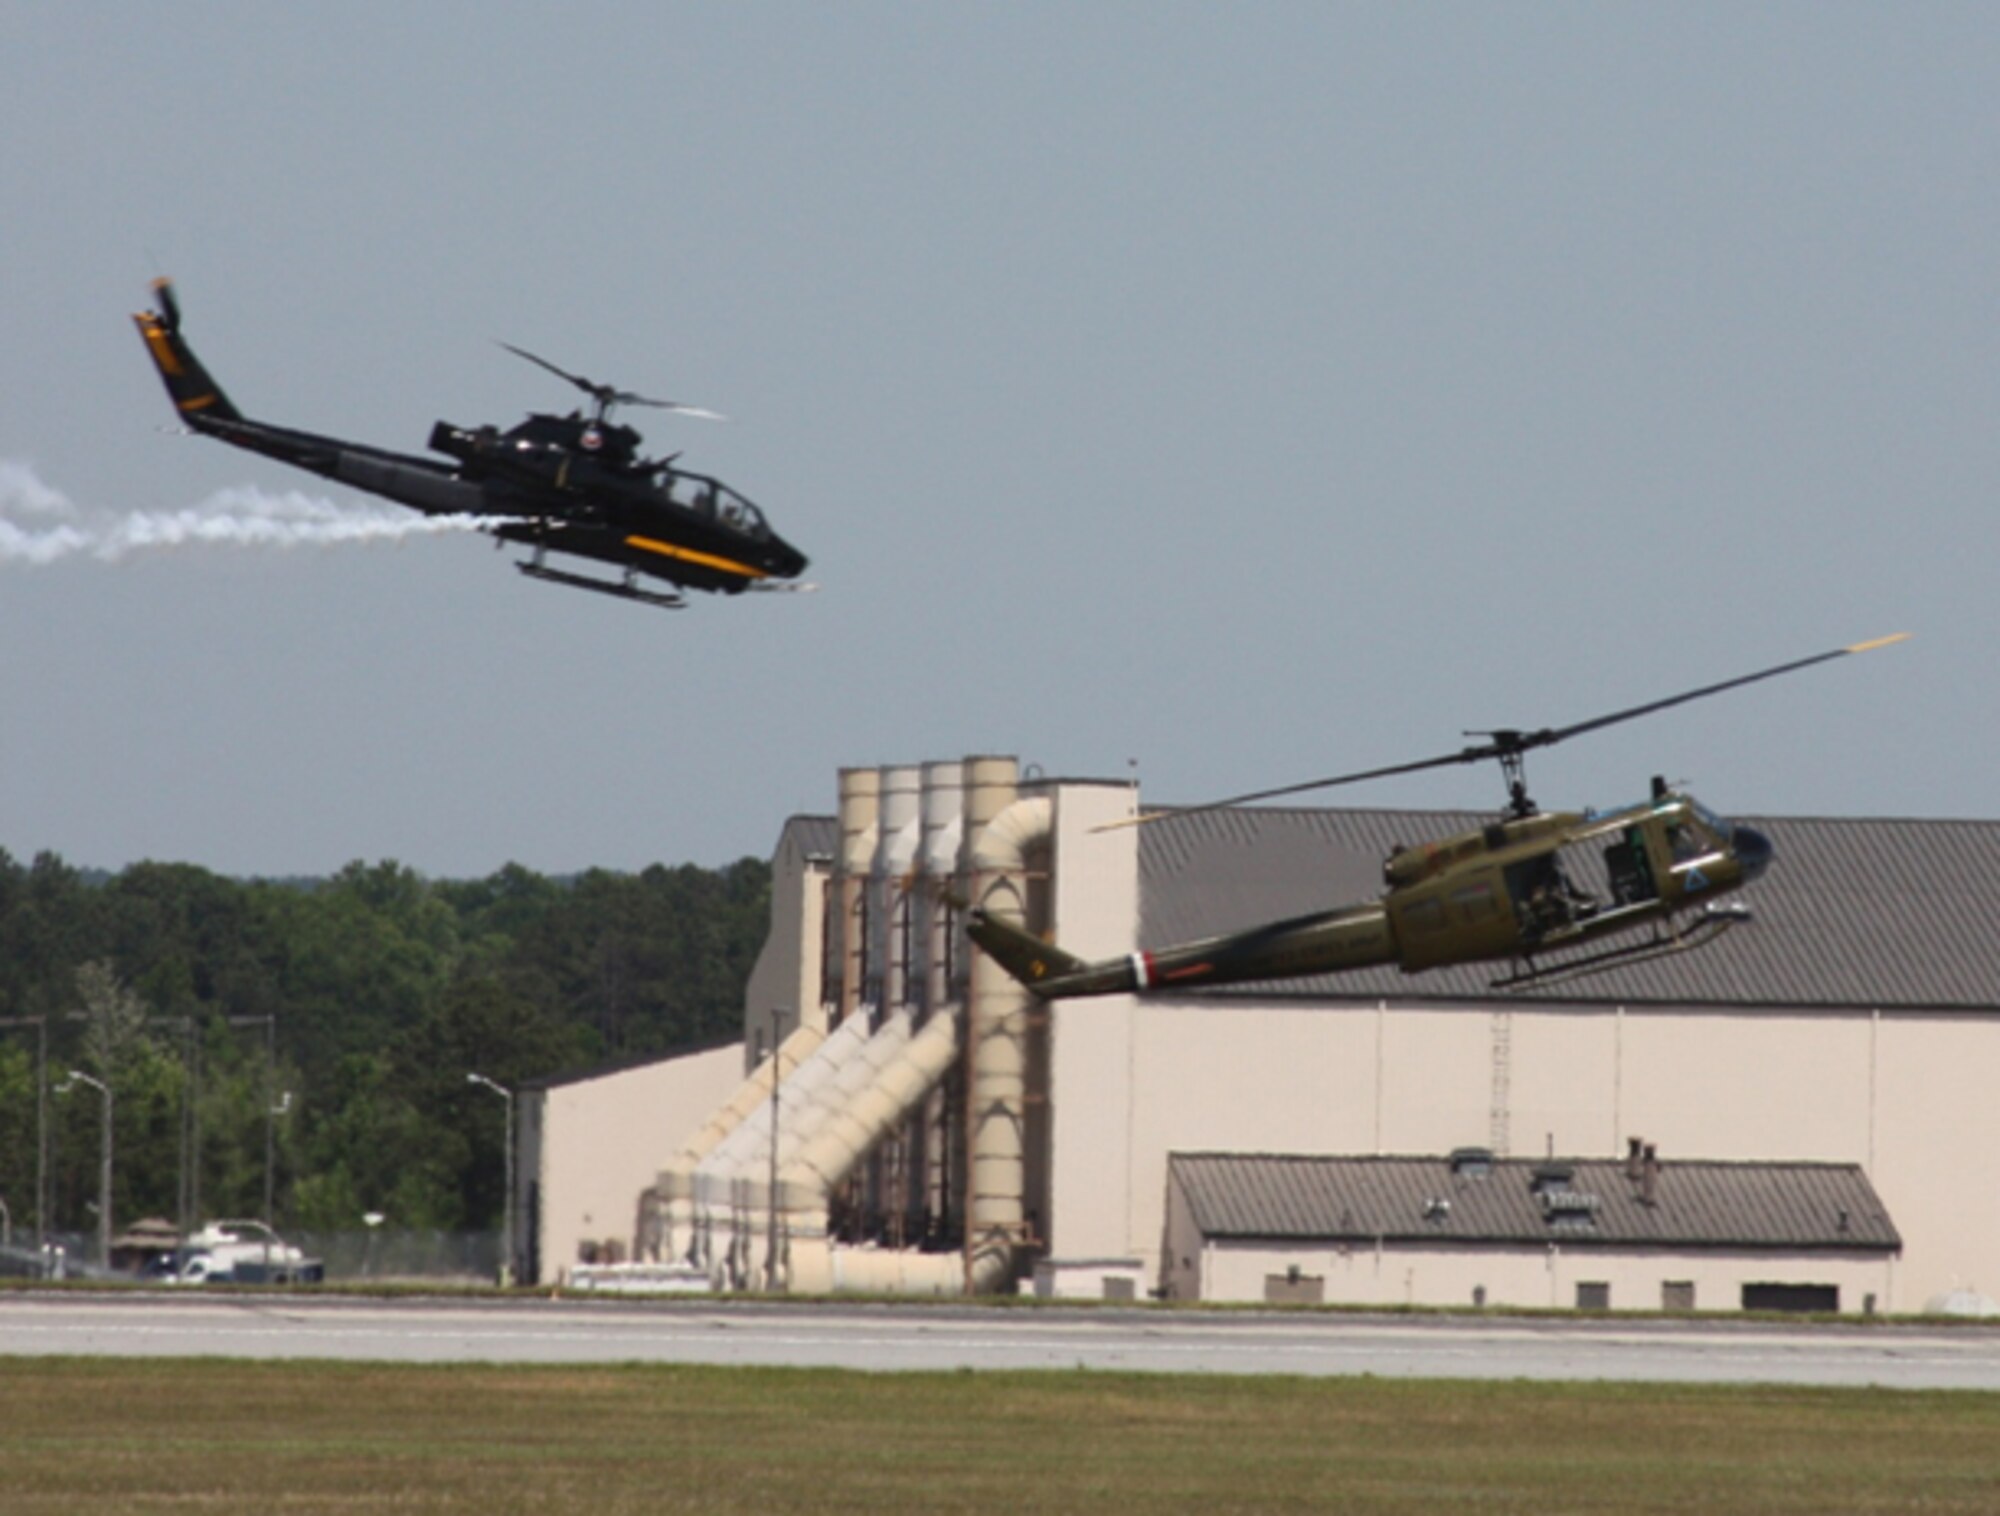 Cobra attack helicopter provide top cover for Huey in re-enacted personnel recovery mission at the Robins Air Show. (U.S. Air Force photo by Senior Airman John Adams)